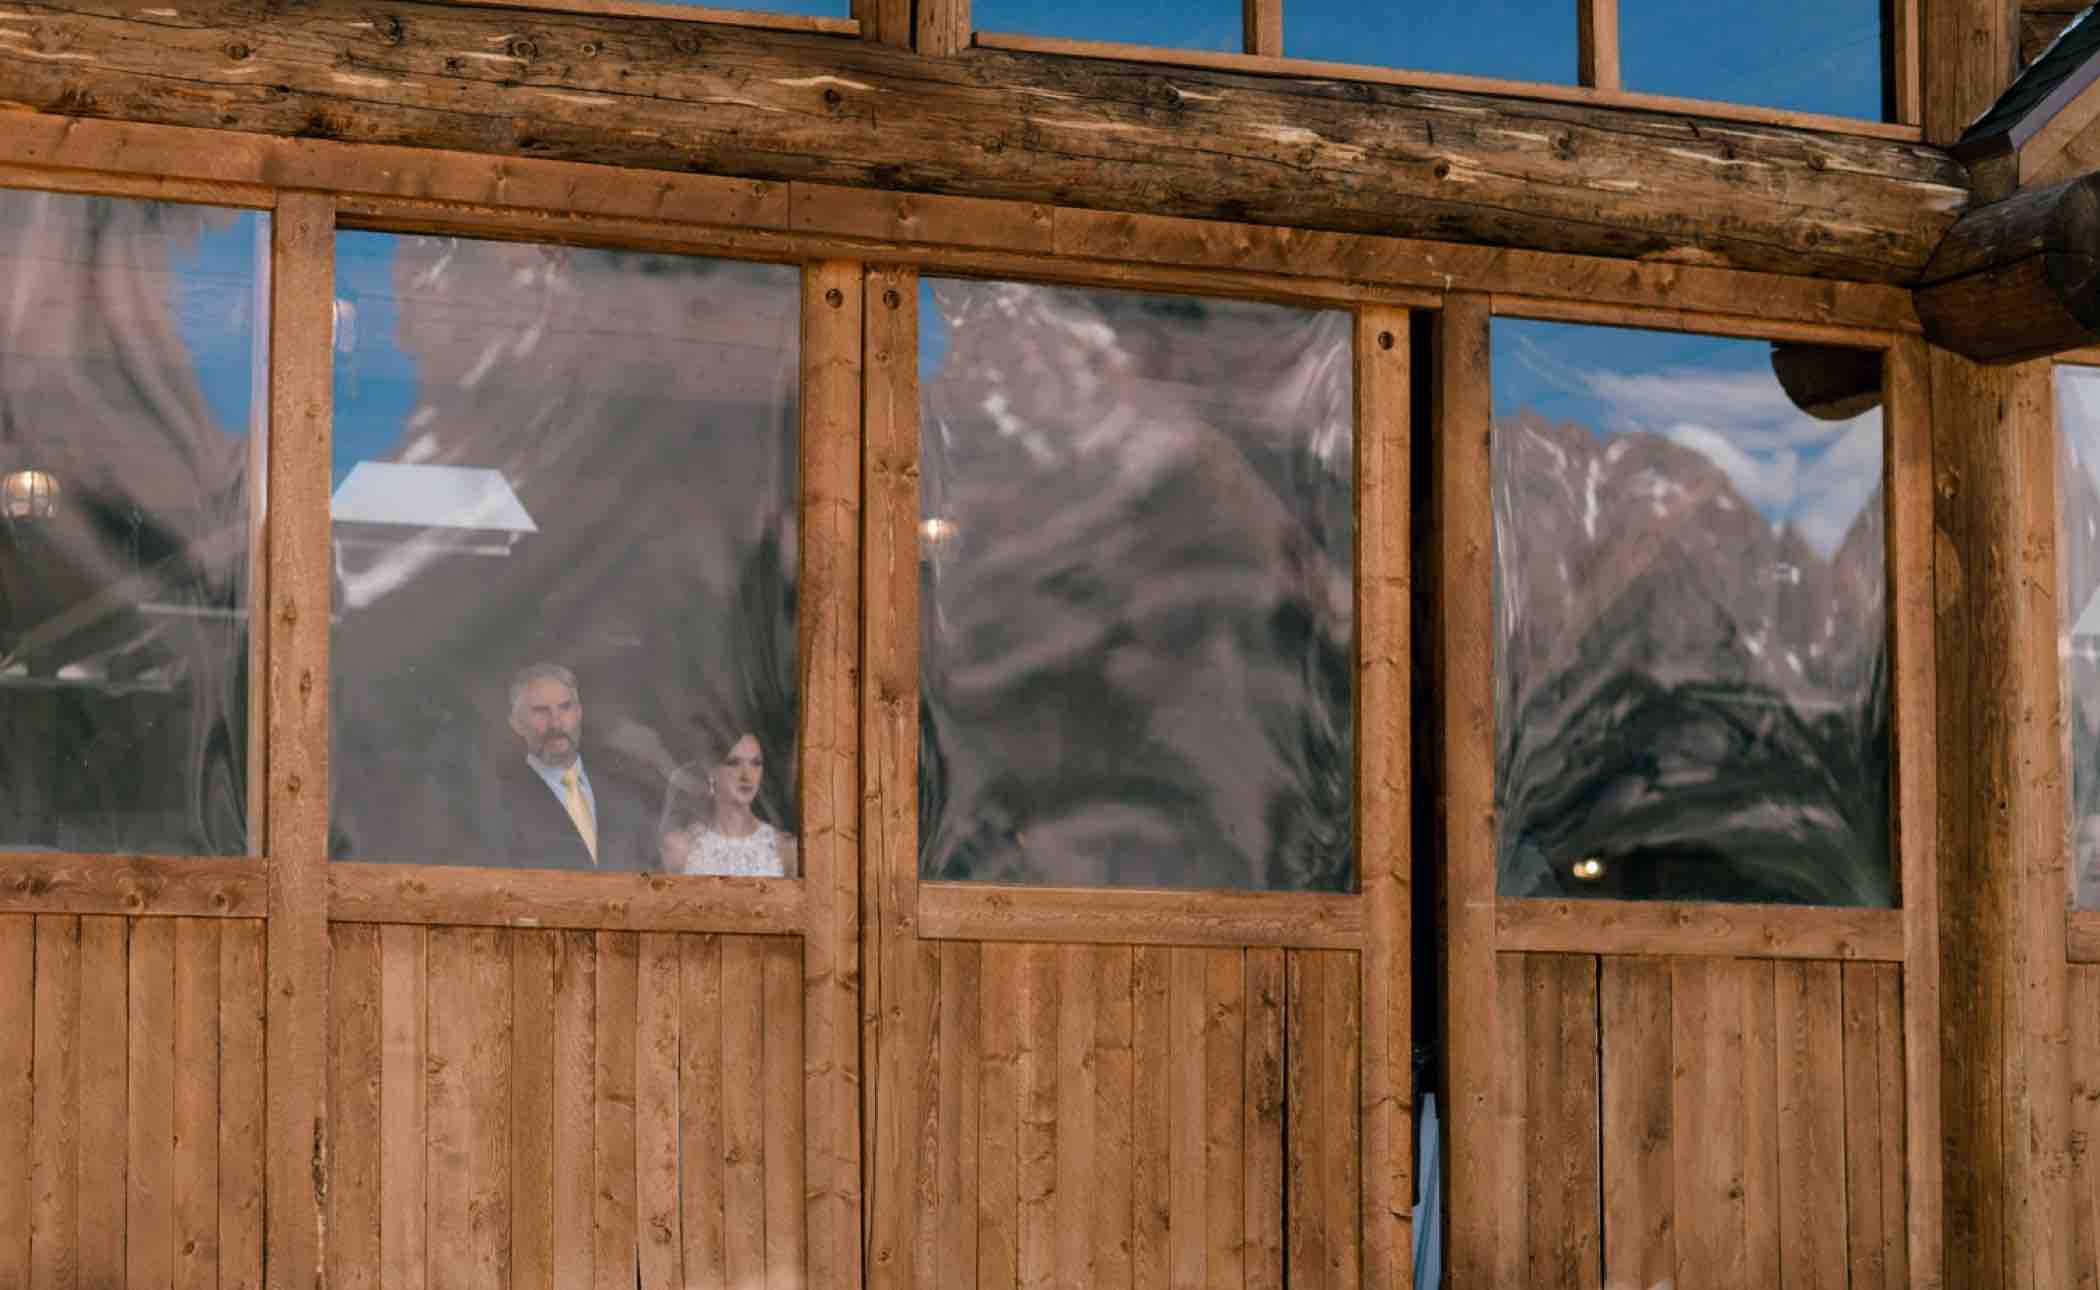 Sallie, the bride, can be seen in the windows of the Piney River Ranch in Vail in the Colorado Rocky Mountains. Photo by Ali and Garrett, Romantic, Adventurous, Nostalgic Wedding Photographers.